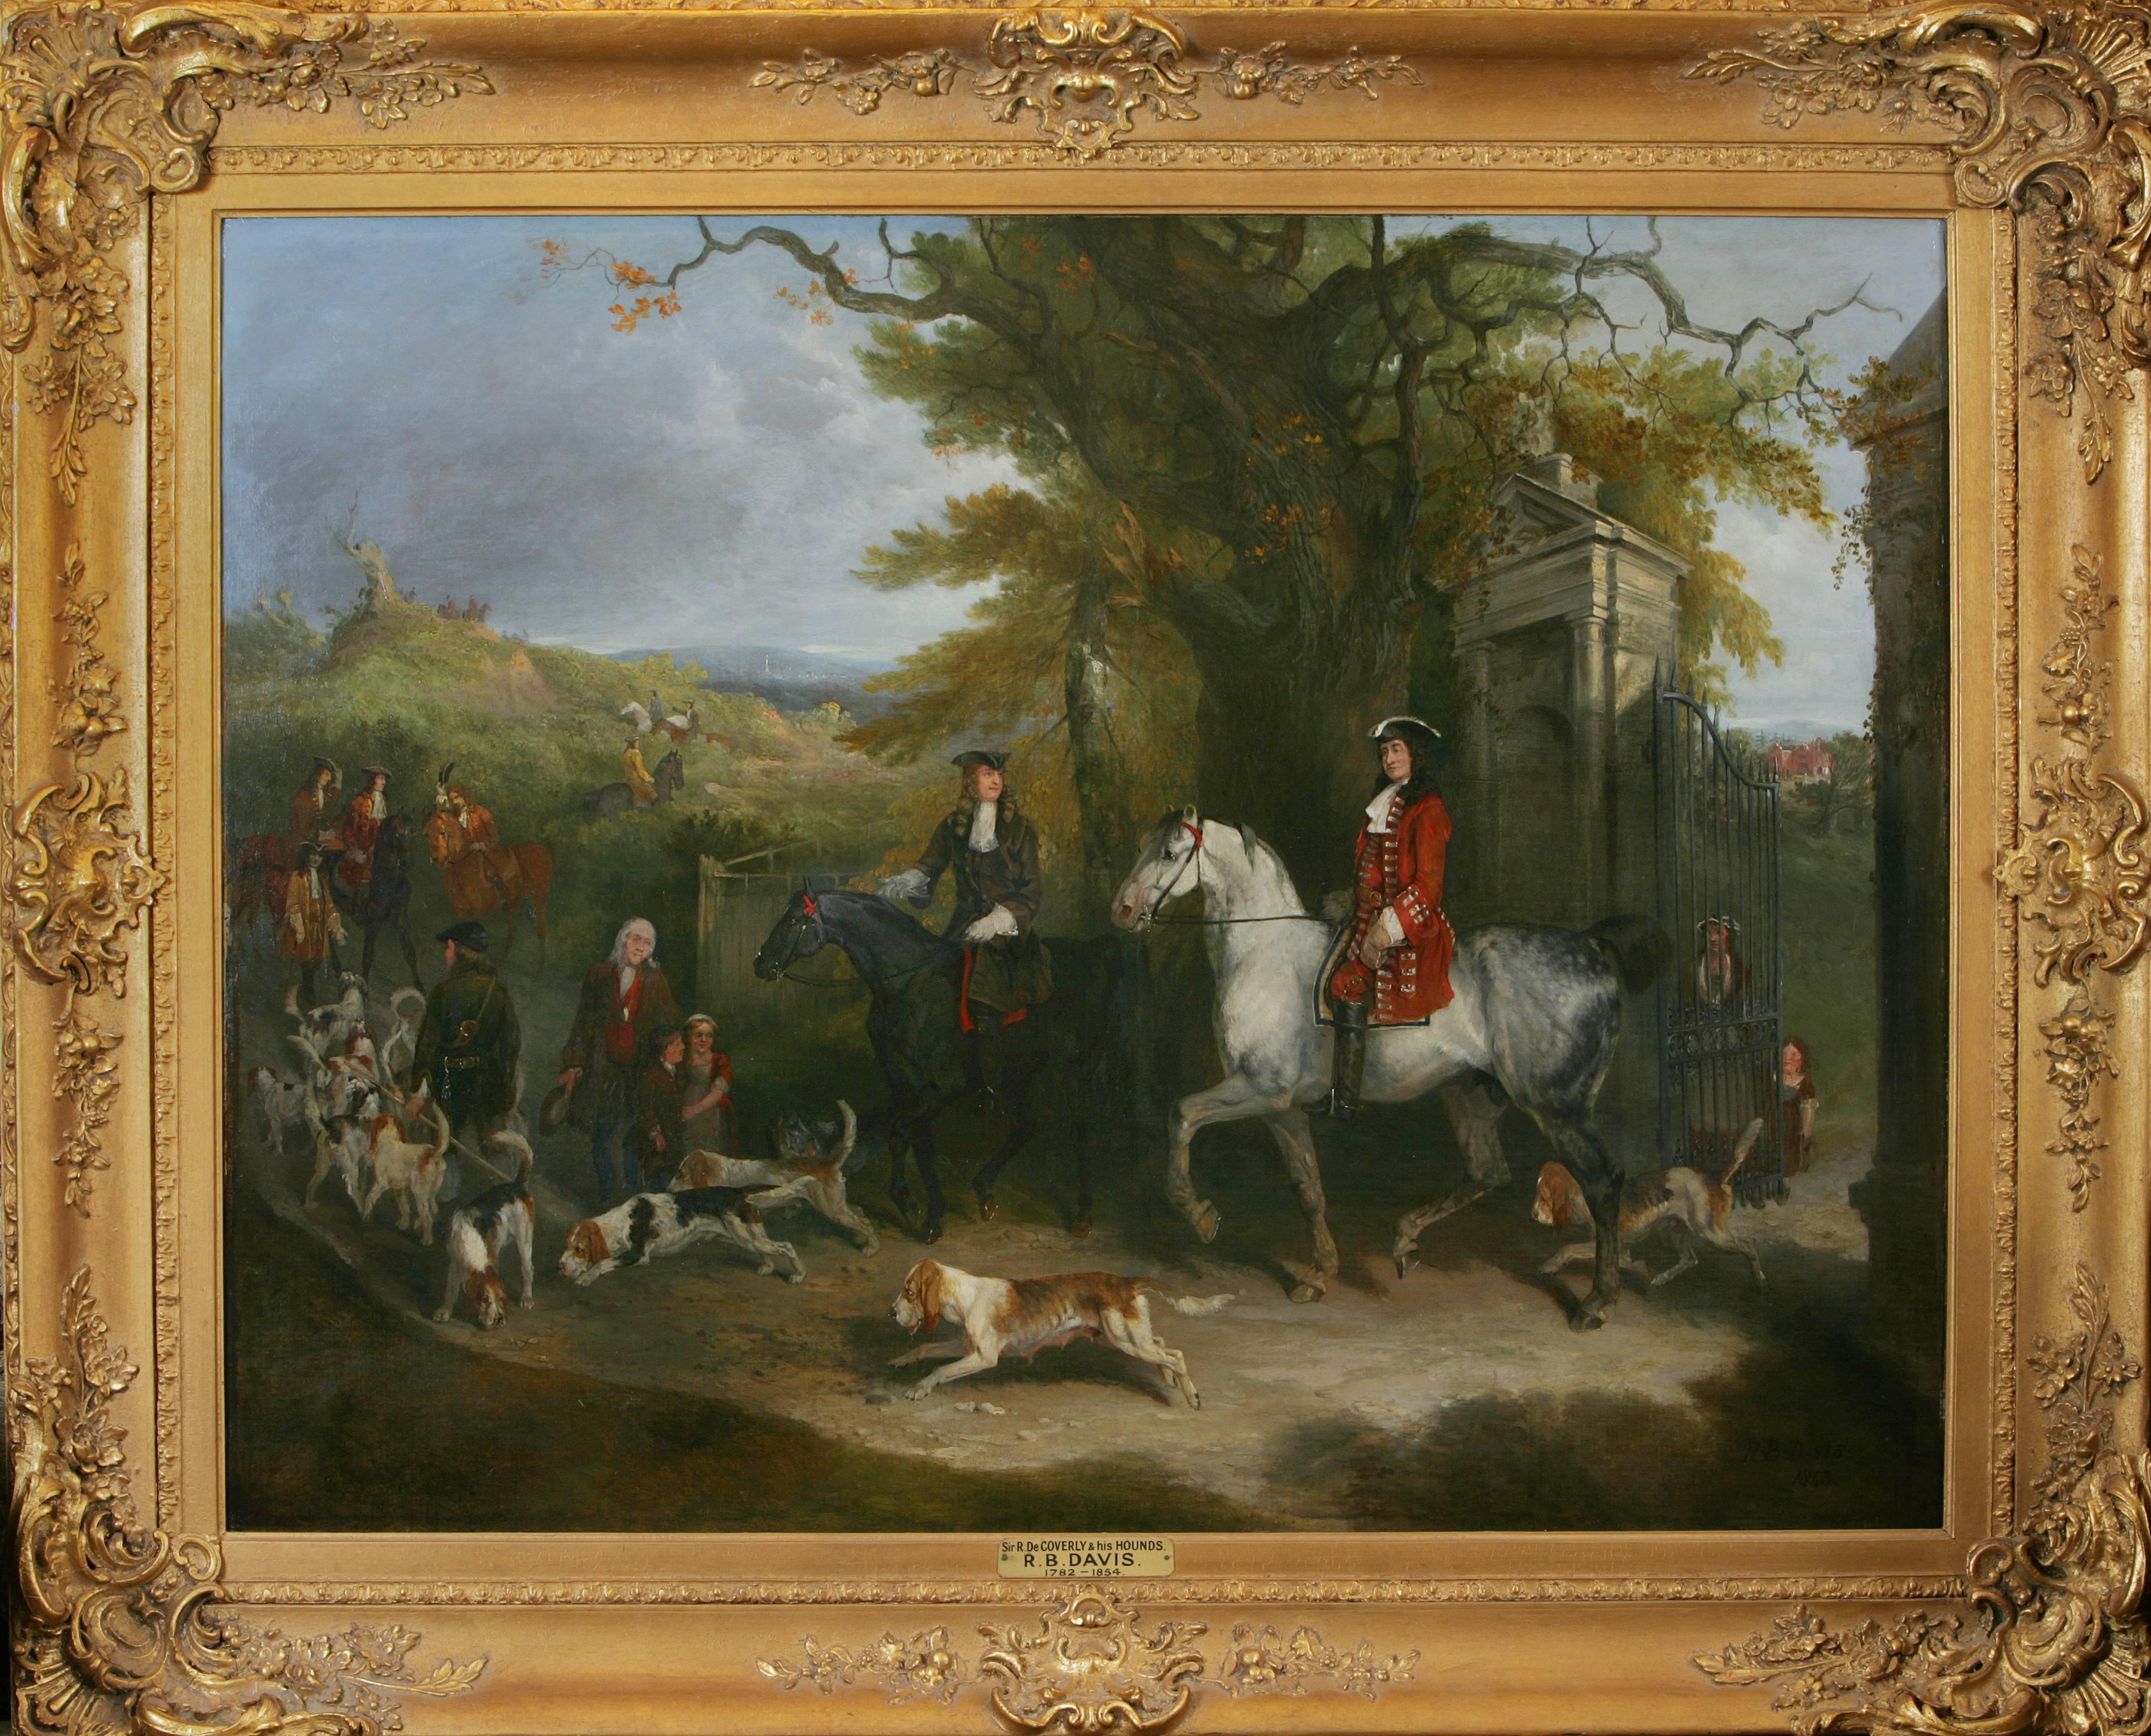 Sir Roger de Coverley and his Hounds A Sporting Portrait, signed and dated 1843 - Painting by Richard Barrett Davis